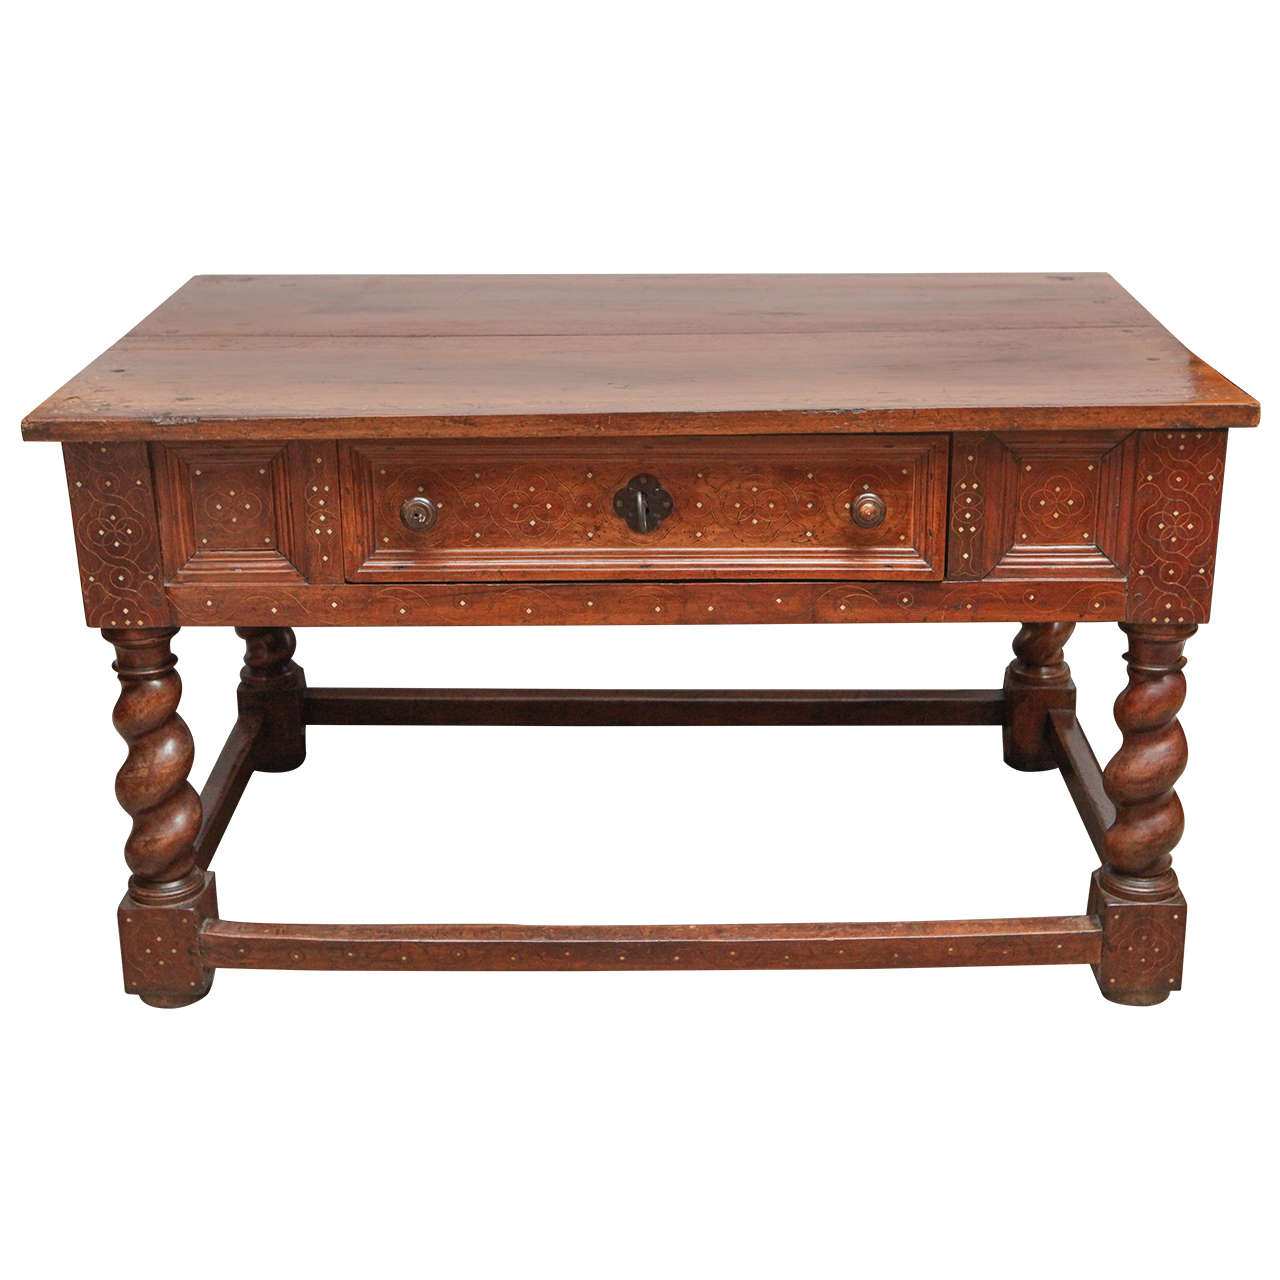 18th Century Italian Walnut Two-Drawer Table with Fruitwood and Bone Inlay For Sale